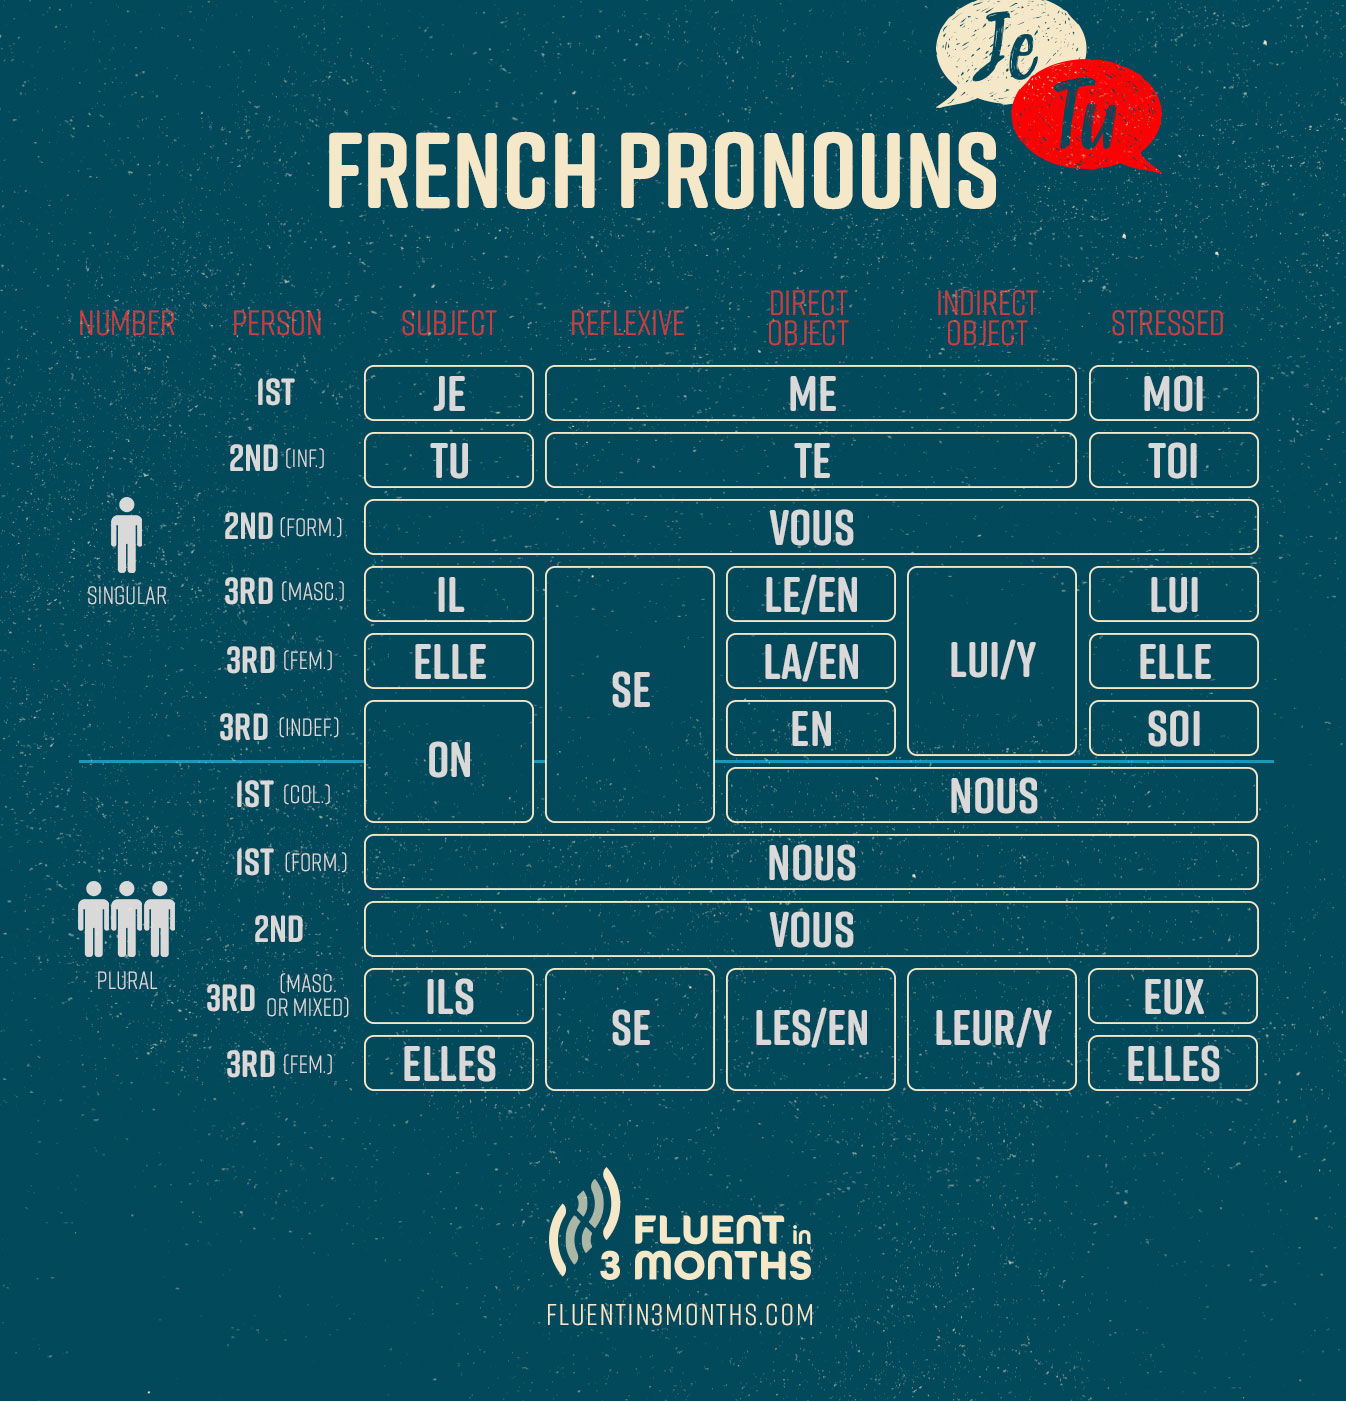 is-there-an-easy-way-to-learn-remember-all-french-pronouns-subject-direct-indirect-object